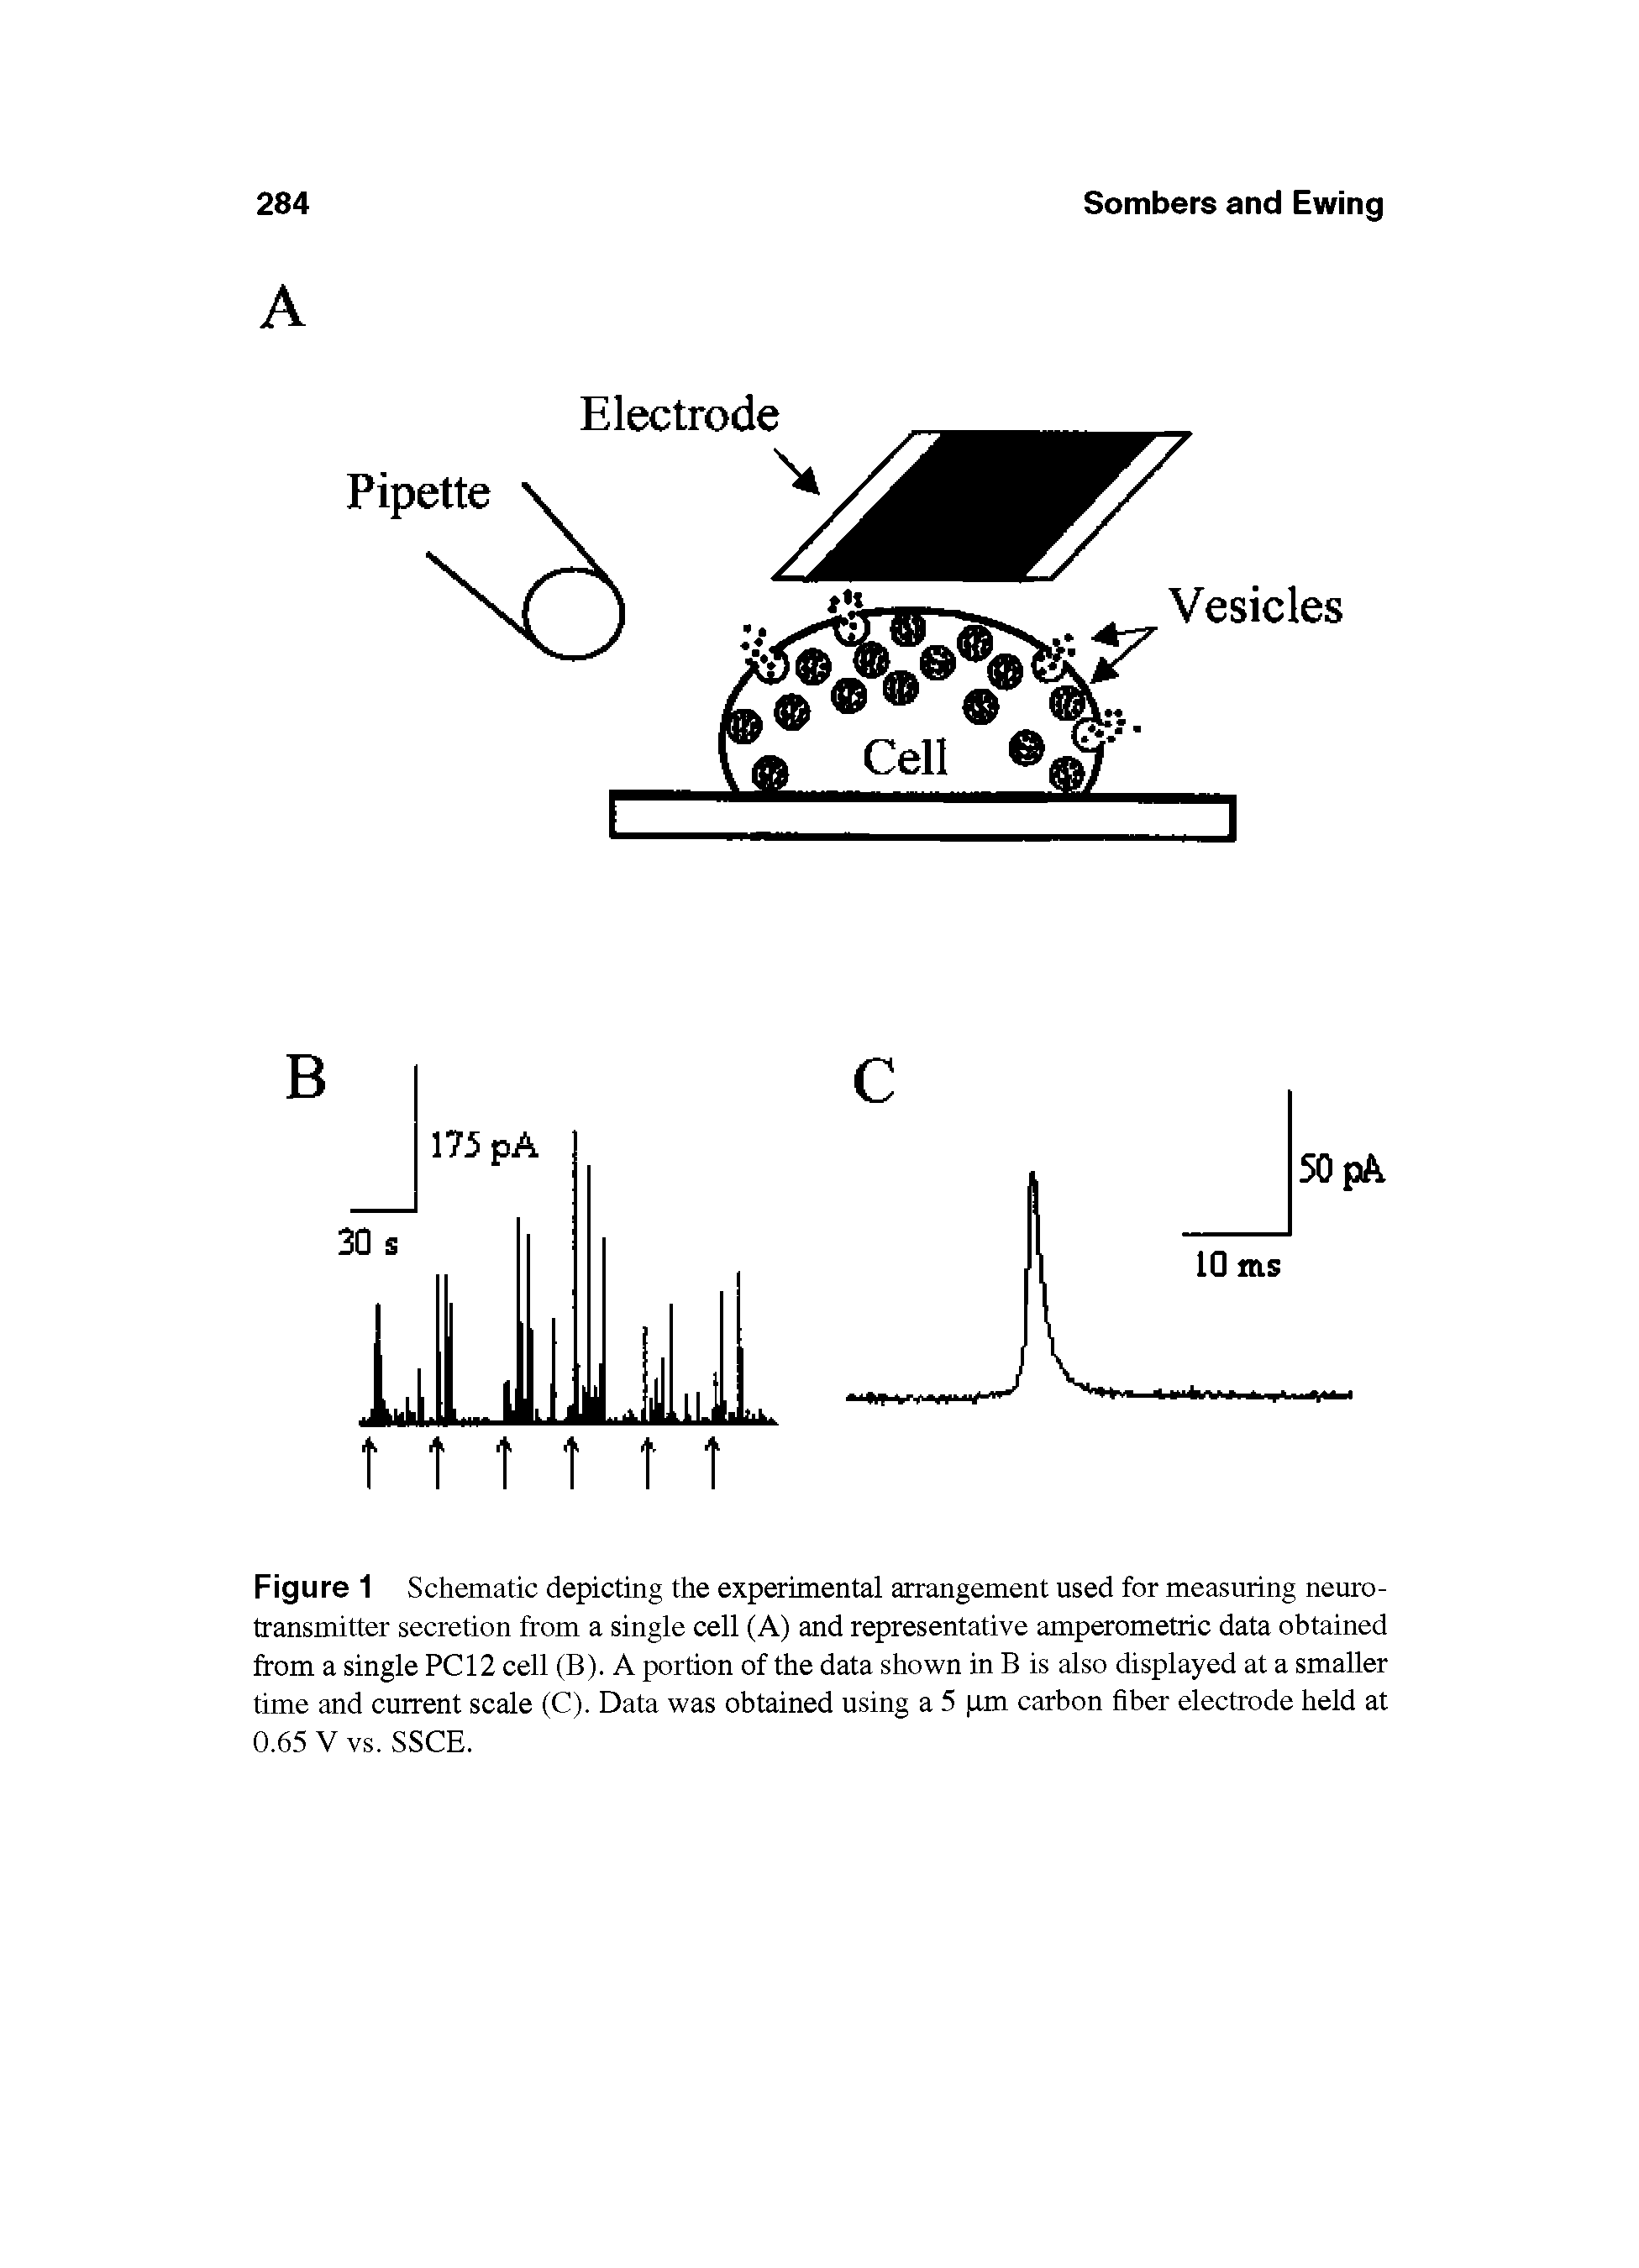 Figure 1 Schematic depicting the experimental arrangement used for measuring neurotransmitter secretion from a single cell (A) and representative amperometiic data obtained from a single PC 12 cell (B). A portion of the data shown in B is also displayed at a smaller time and current scale (C). Data was obtained using a 5 pm carbon fiber electrode held at 0.65 V vs. SSCE.